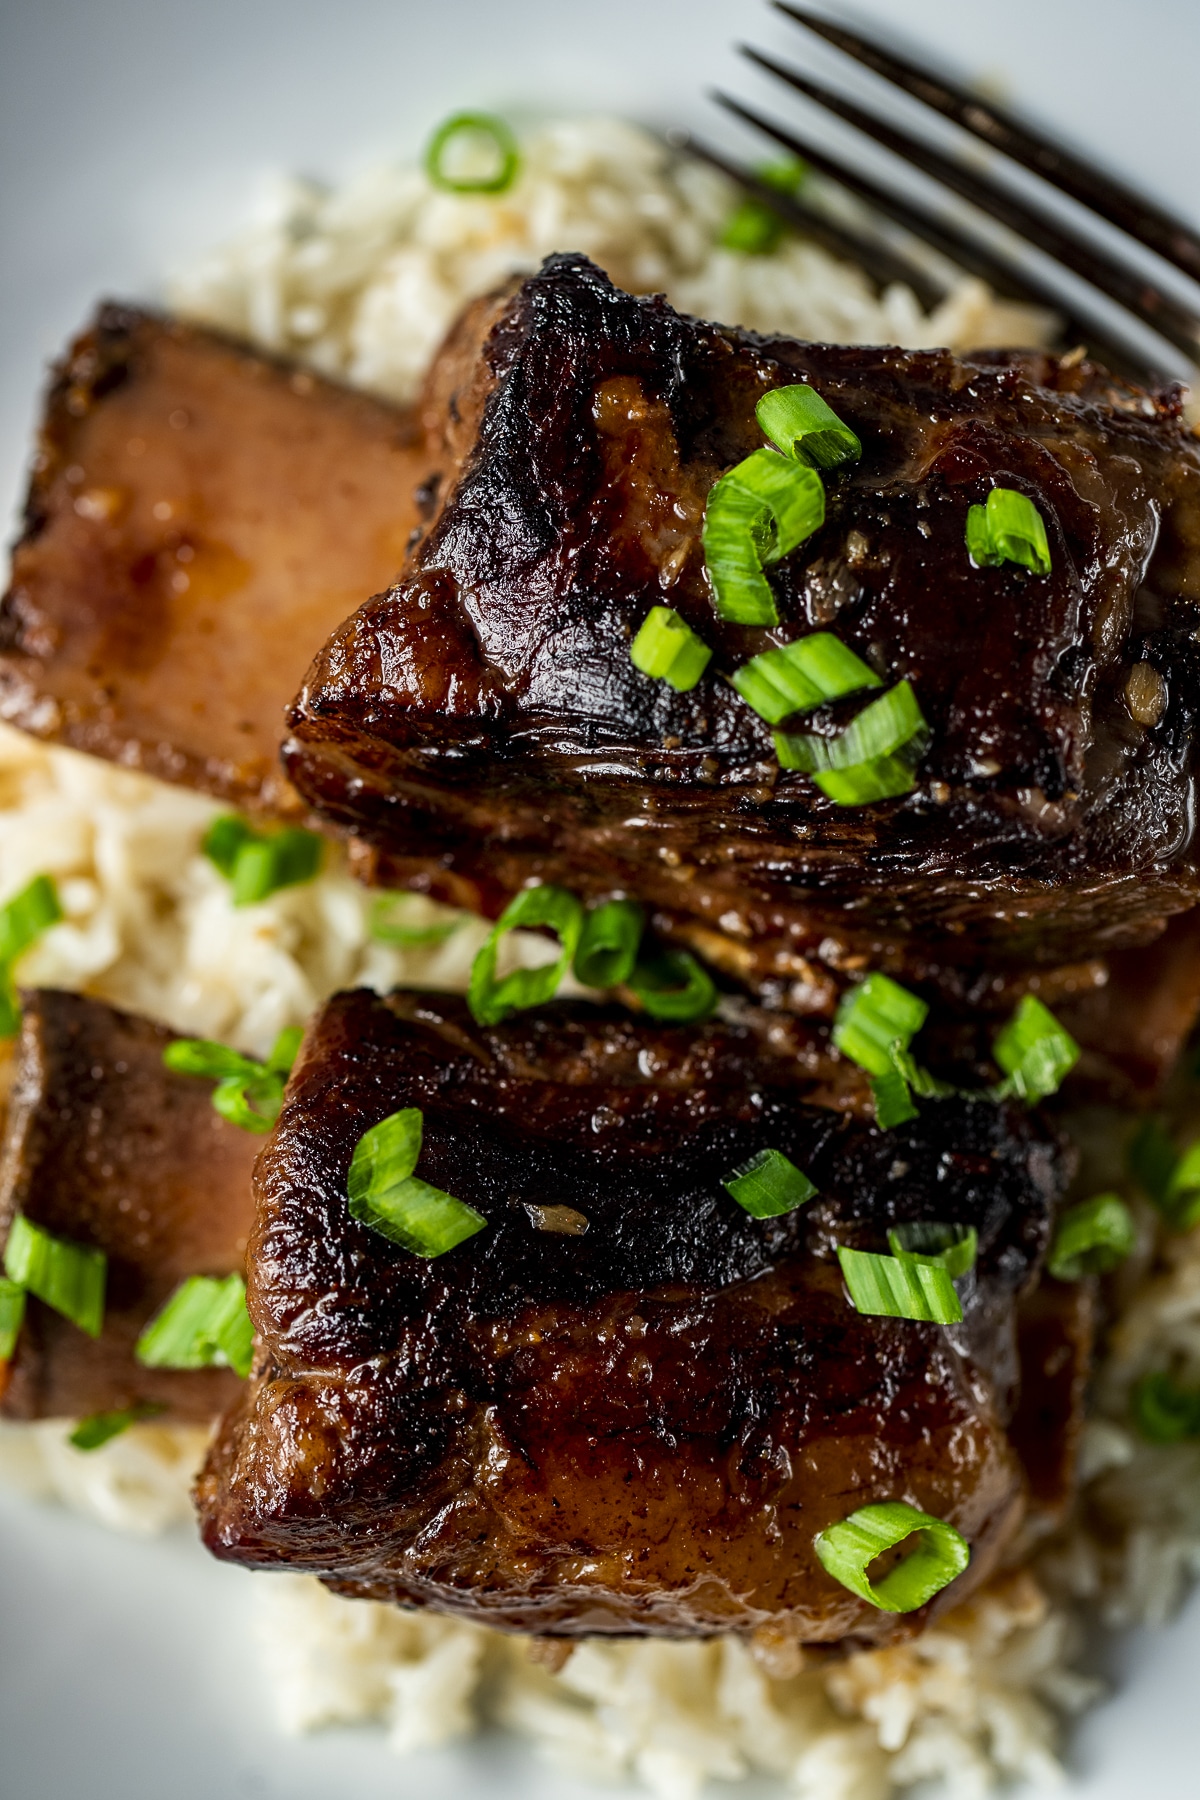 Close up view of two short ribs garnished with green onions.